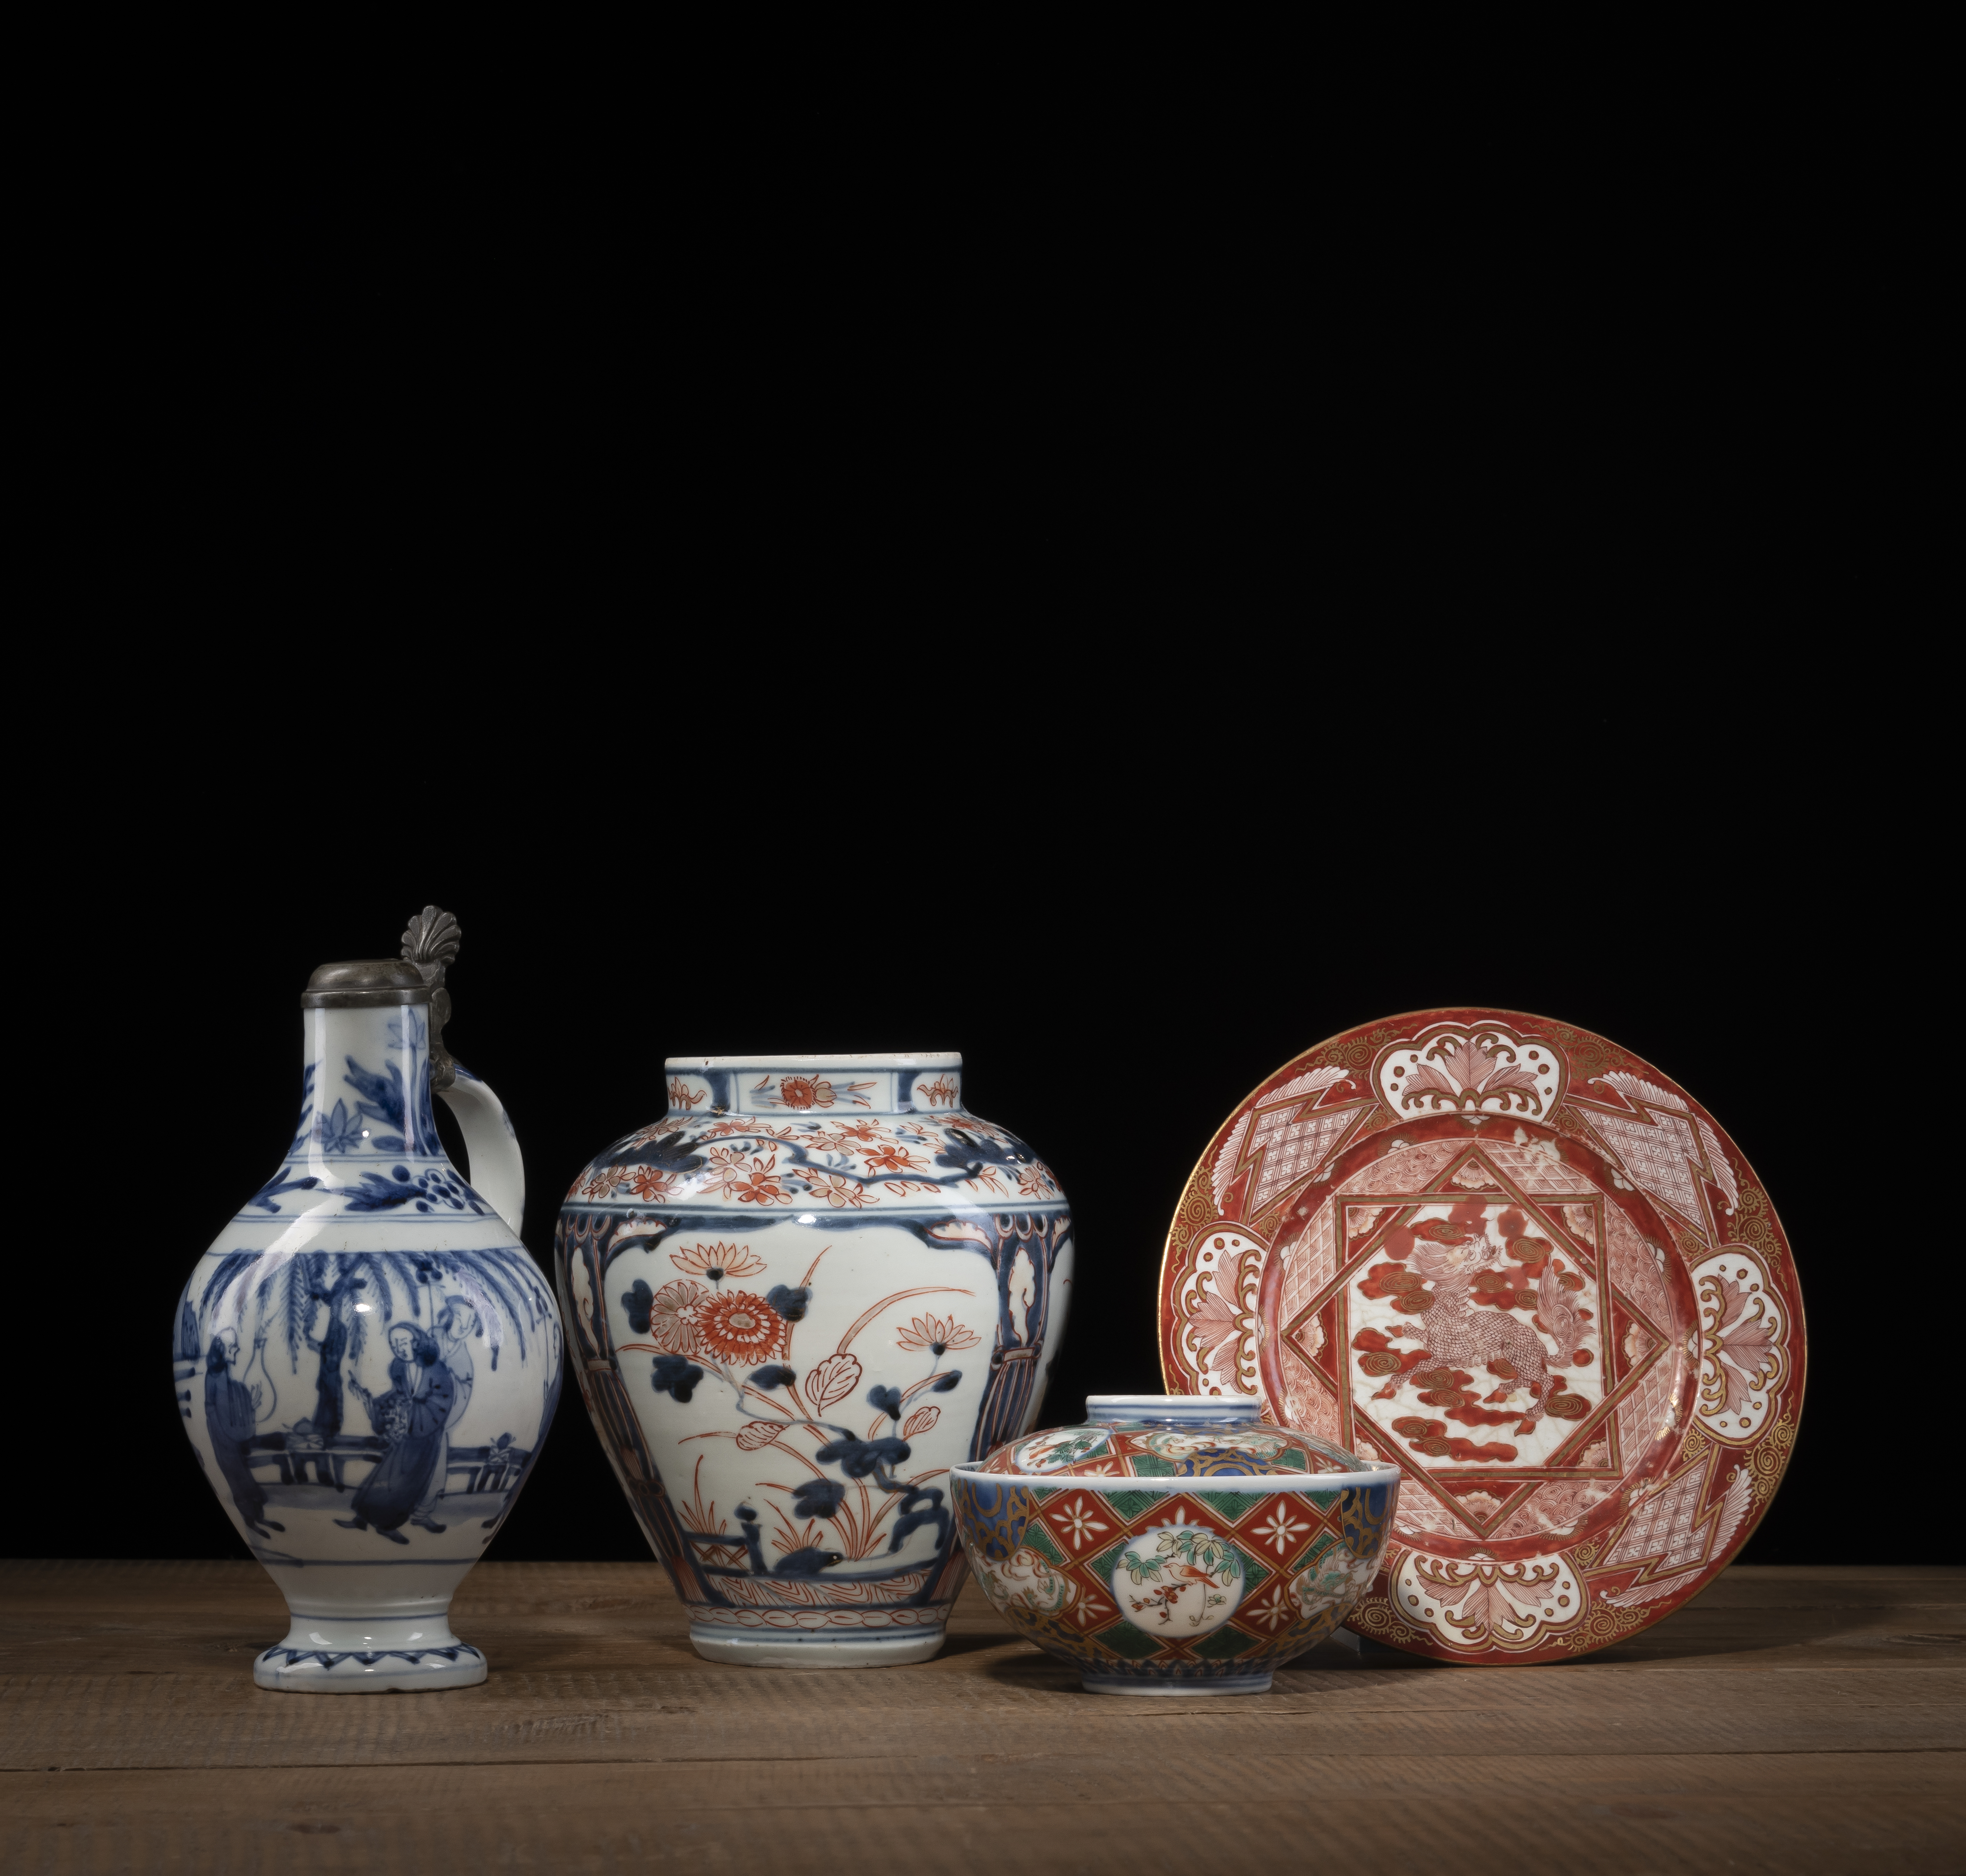 AN 'IMARI' BOWL AND COVER, A VASE, A 'KUTANI' DISH, AND AN 'ARITA' BLUE AND WHITE PORCELAIN EWER - Image 2 of 5